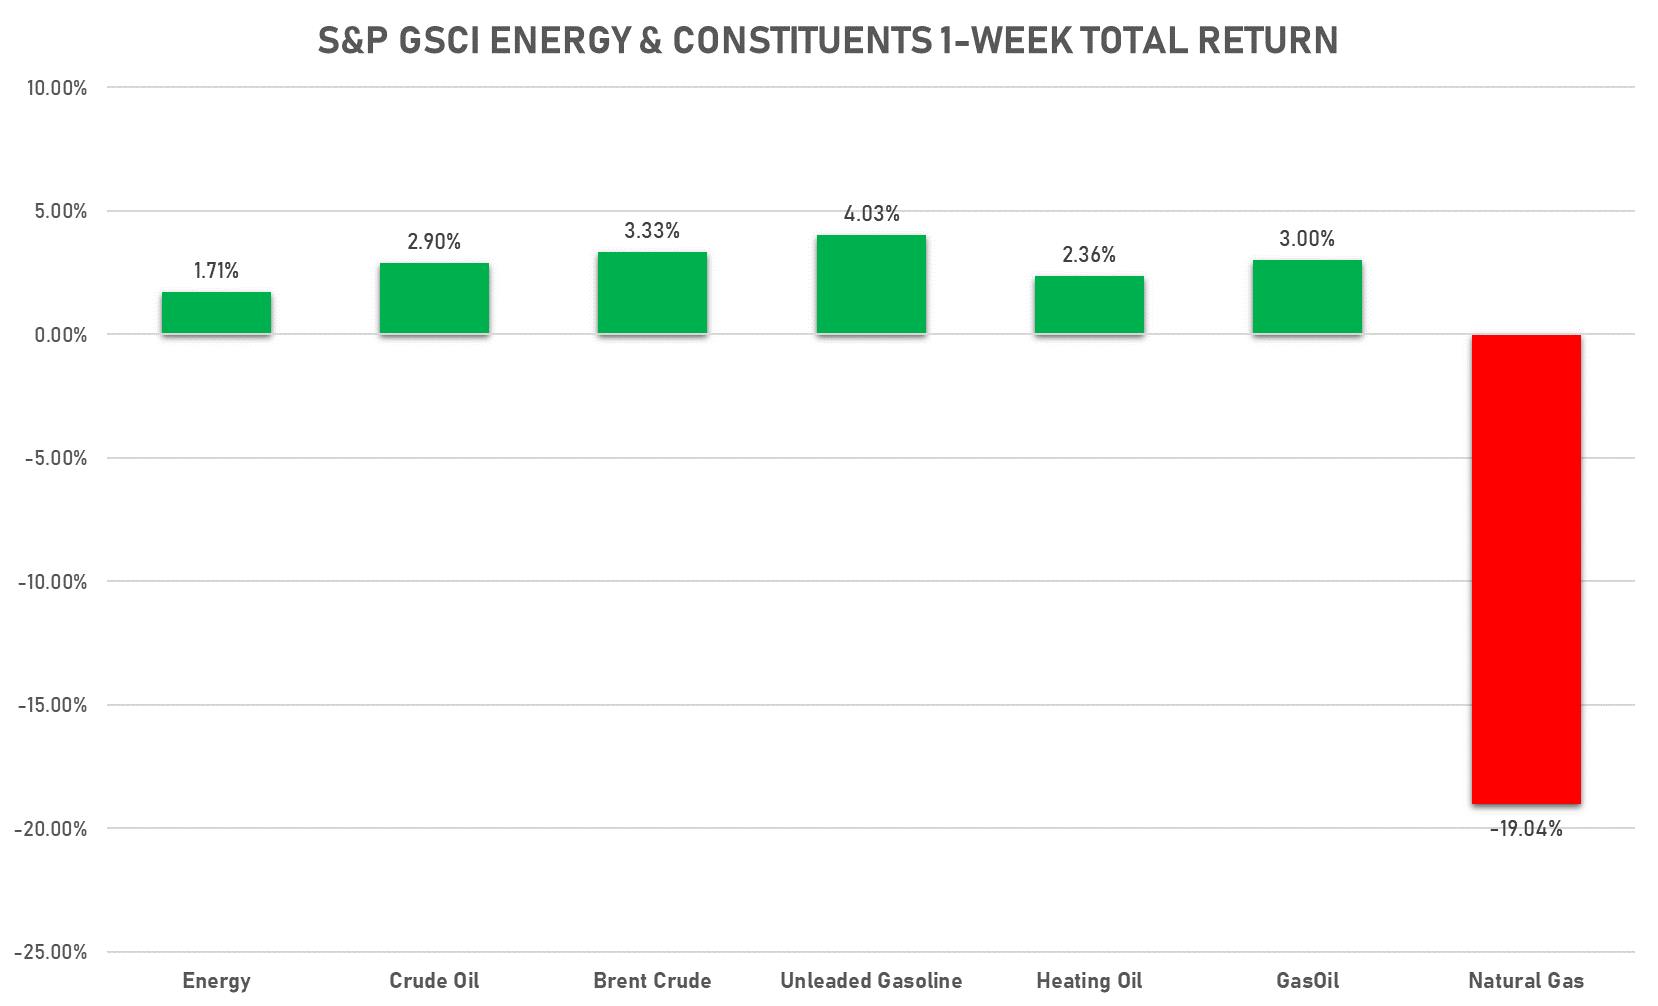 GSCI Energy This Week | Sources: phipost.com, Refinitiv data